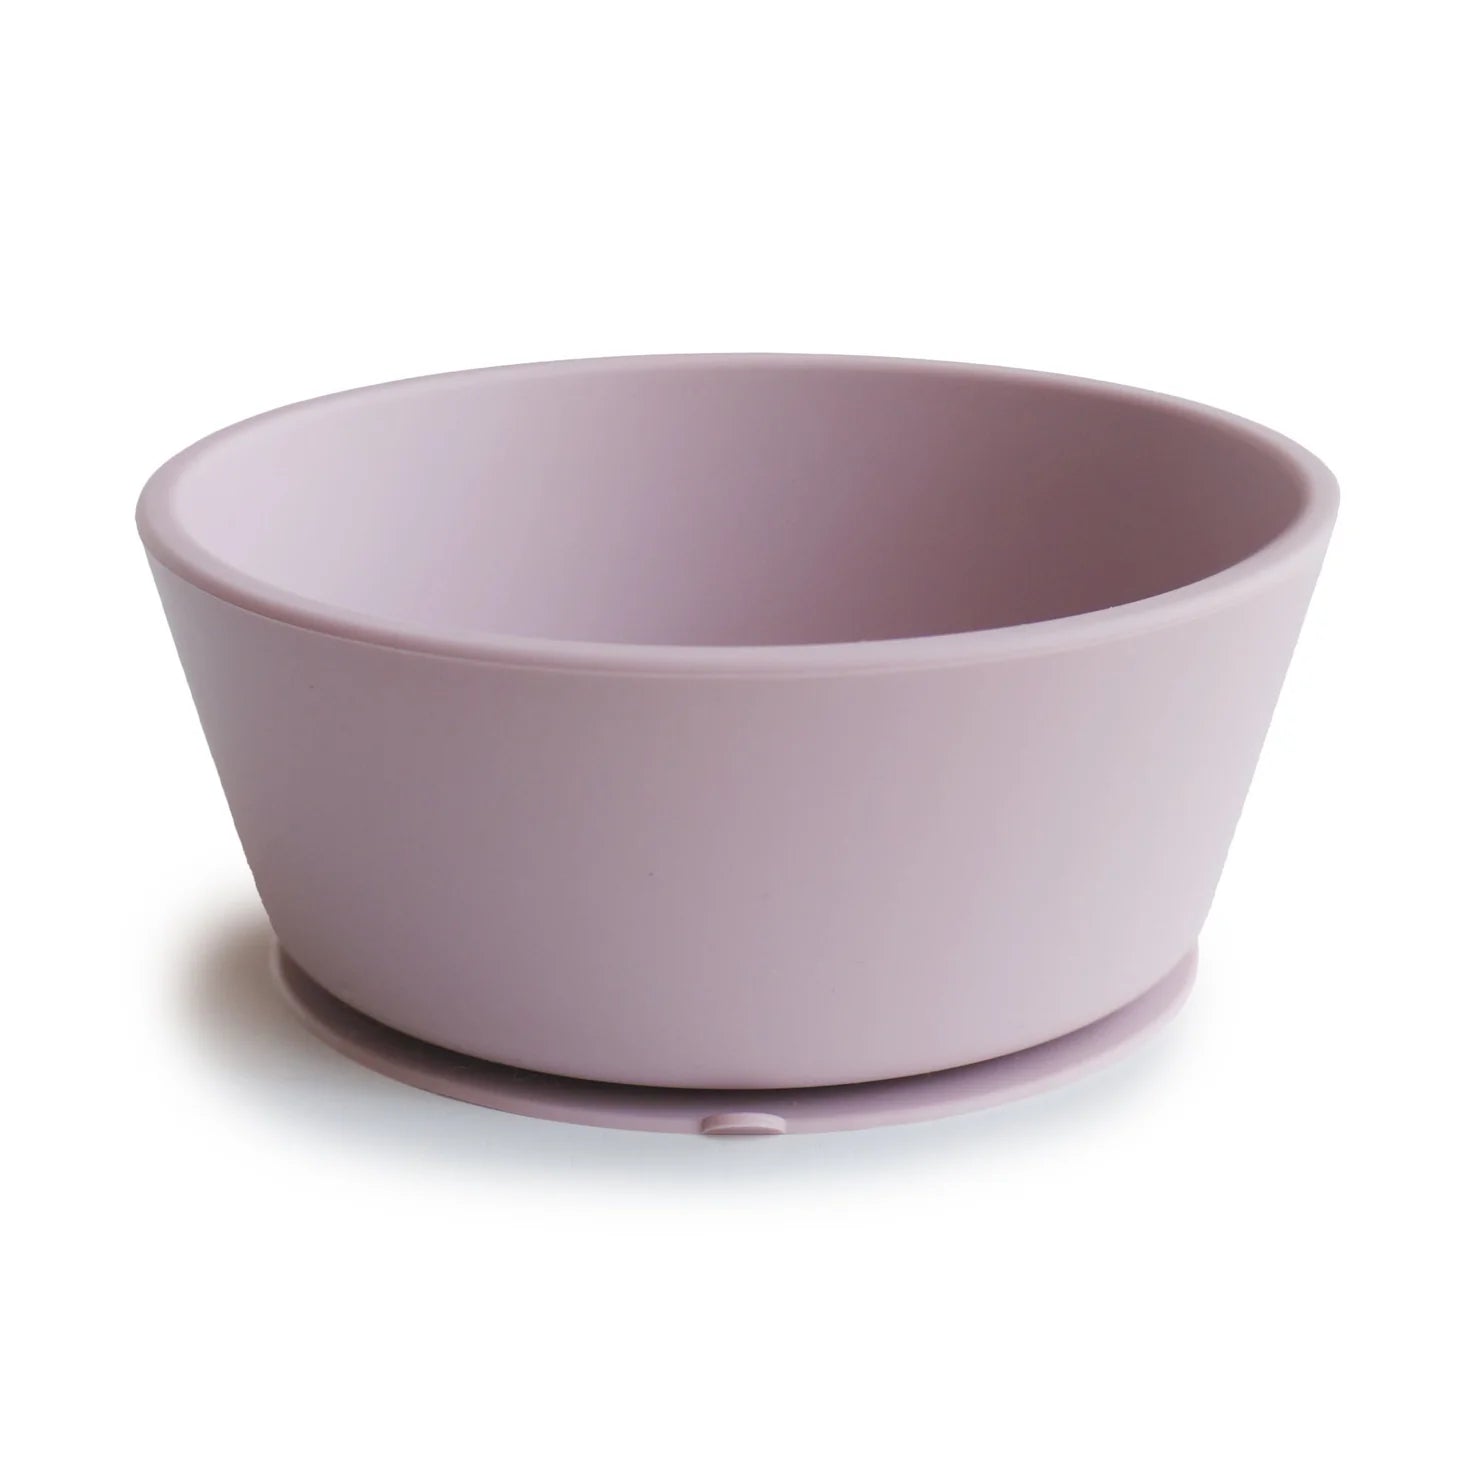 MUSHIE - Silicone Suction Bowl - Soft Lilac